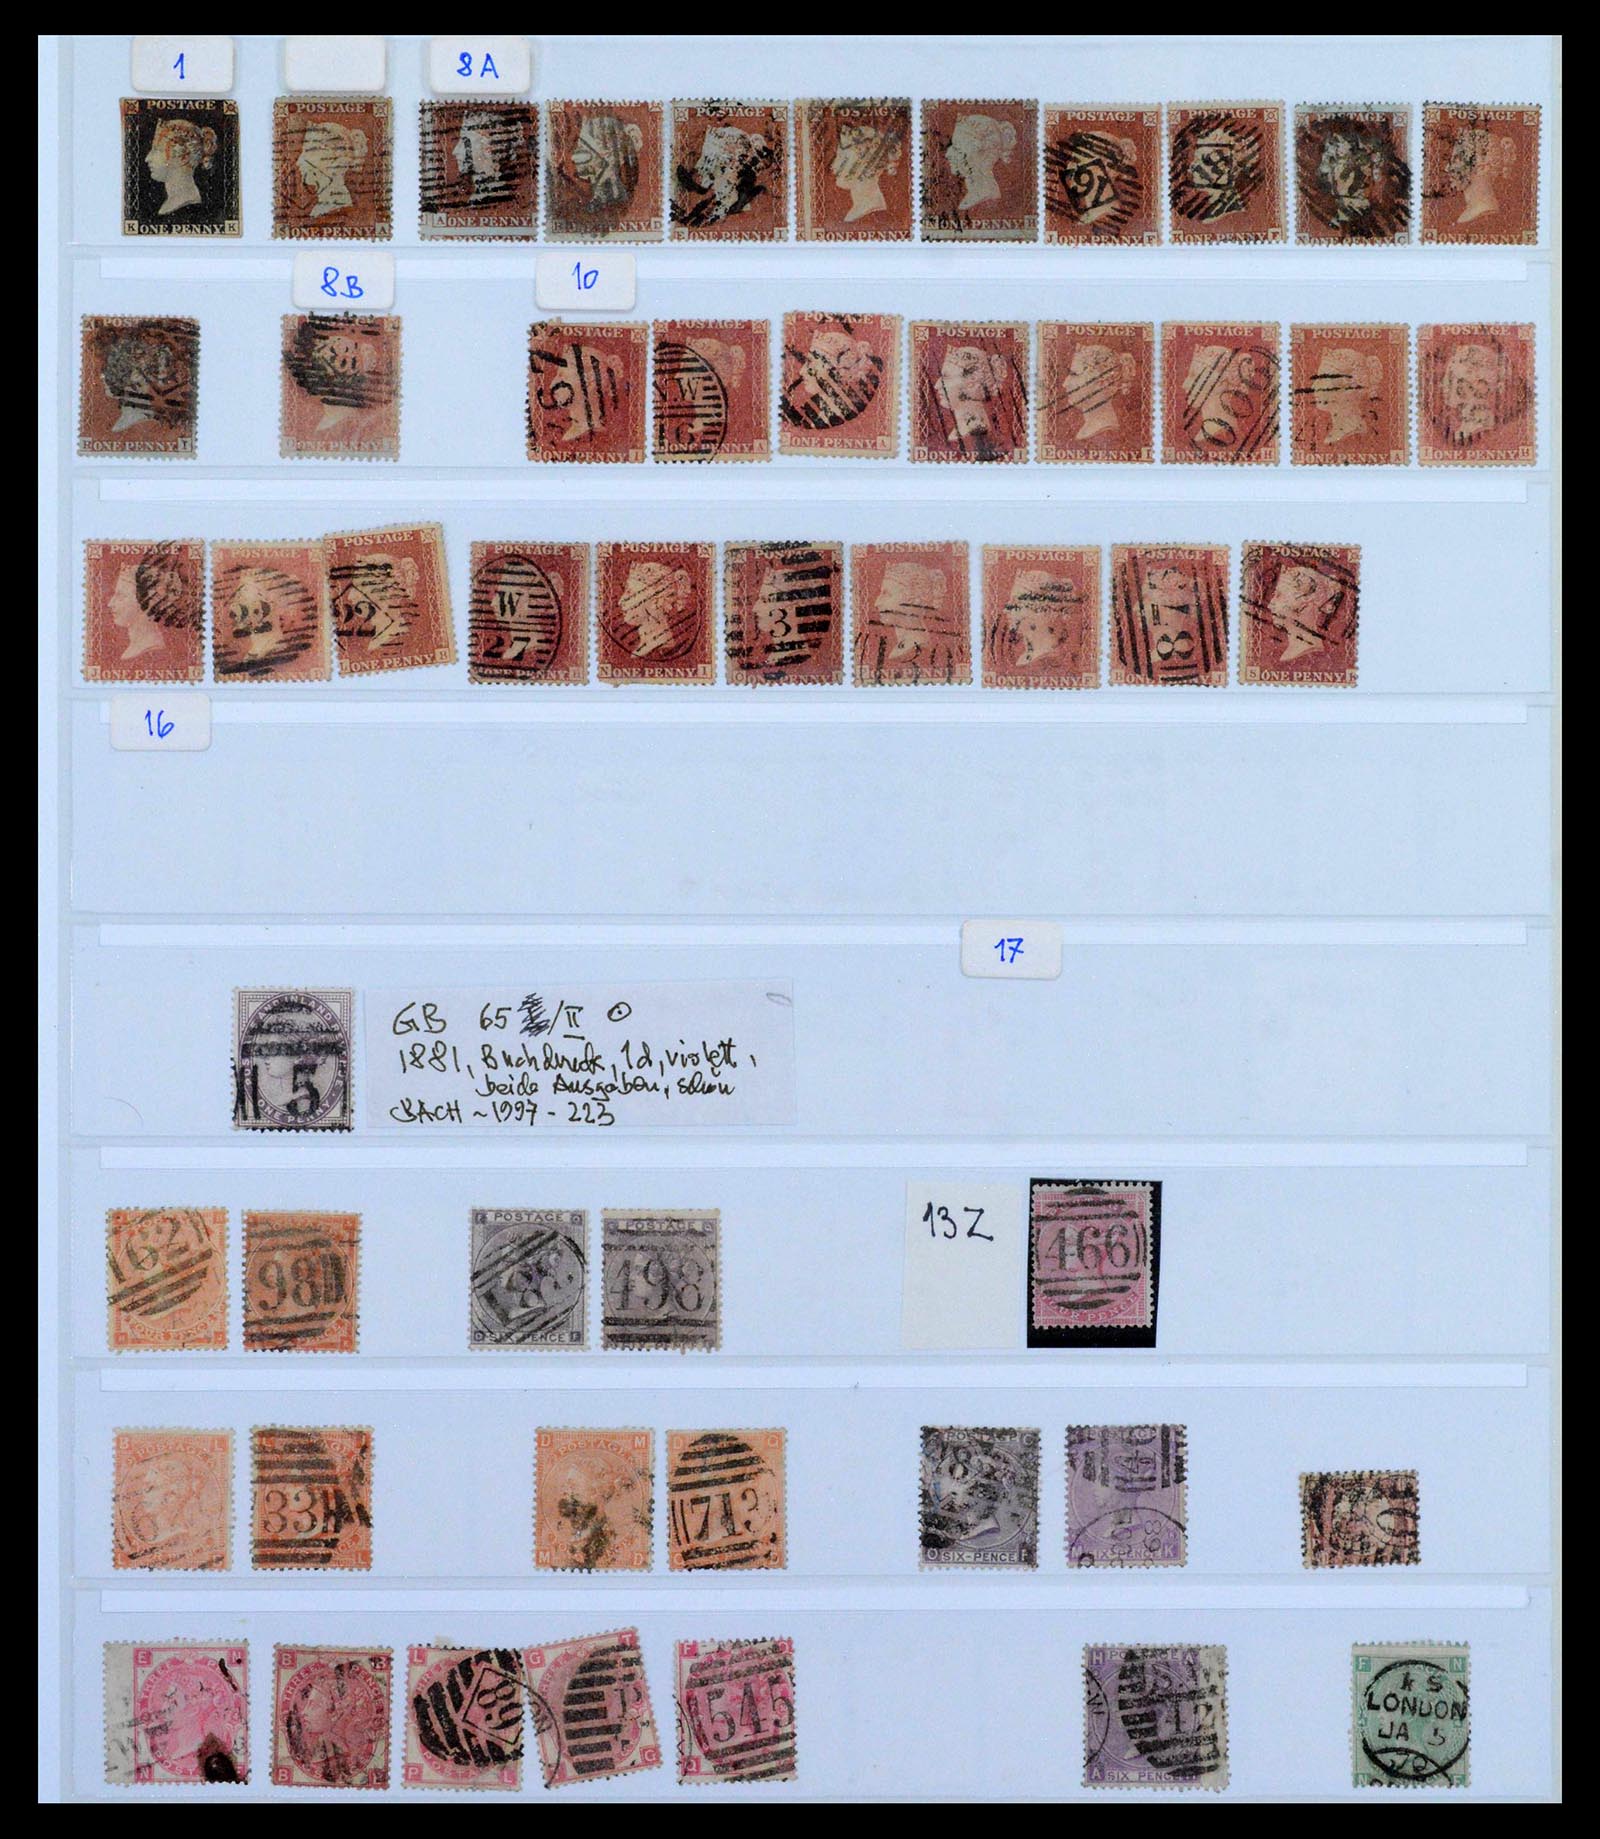 39375 0050 - Stamp collection 39375 Great Britain super collection 1840-1980.